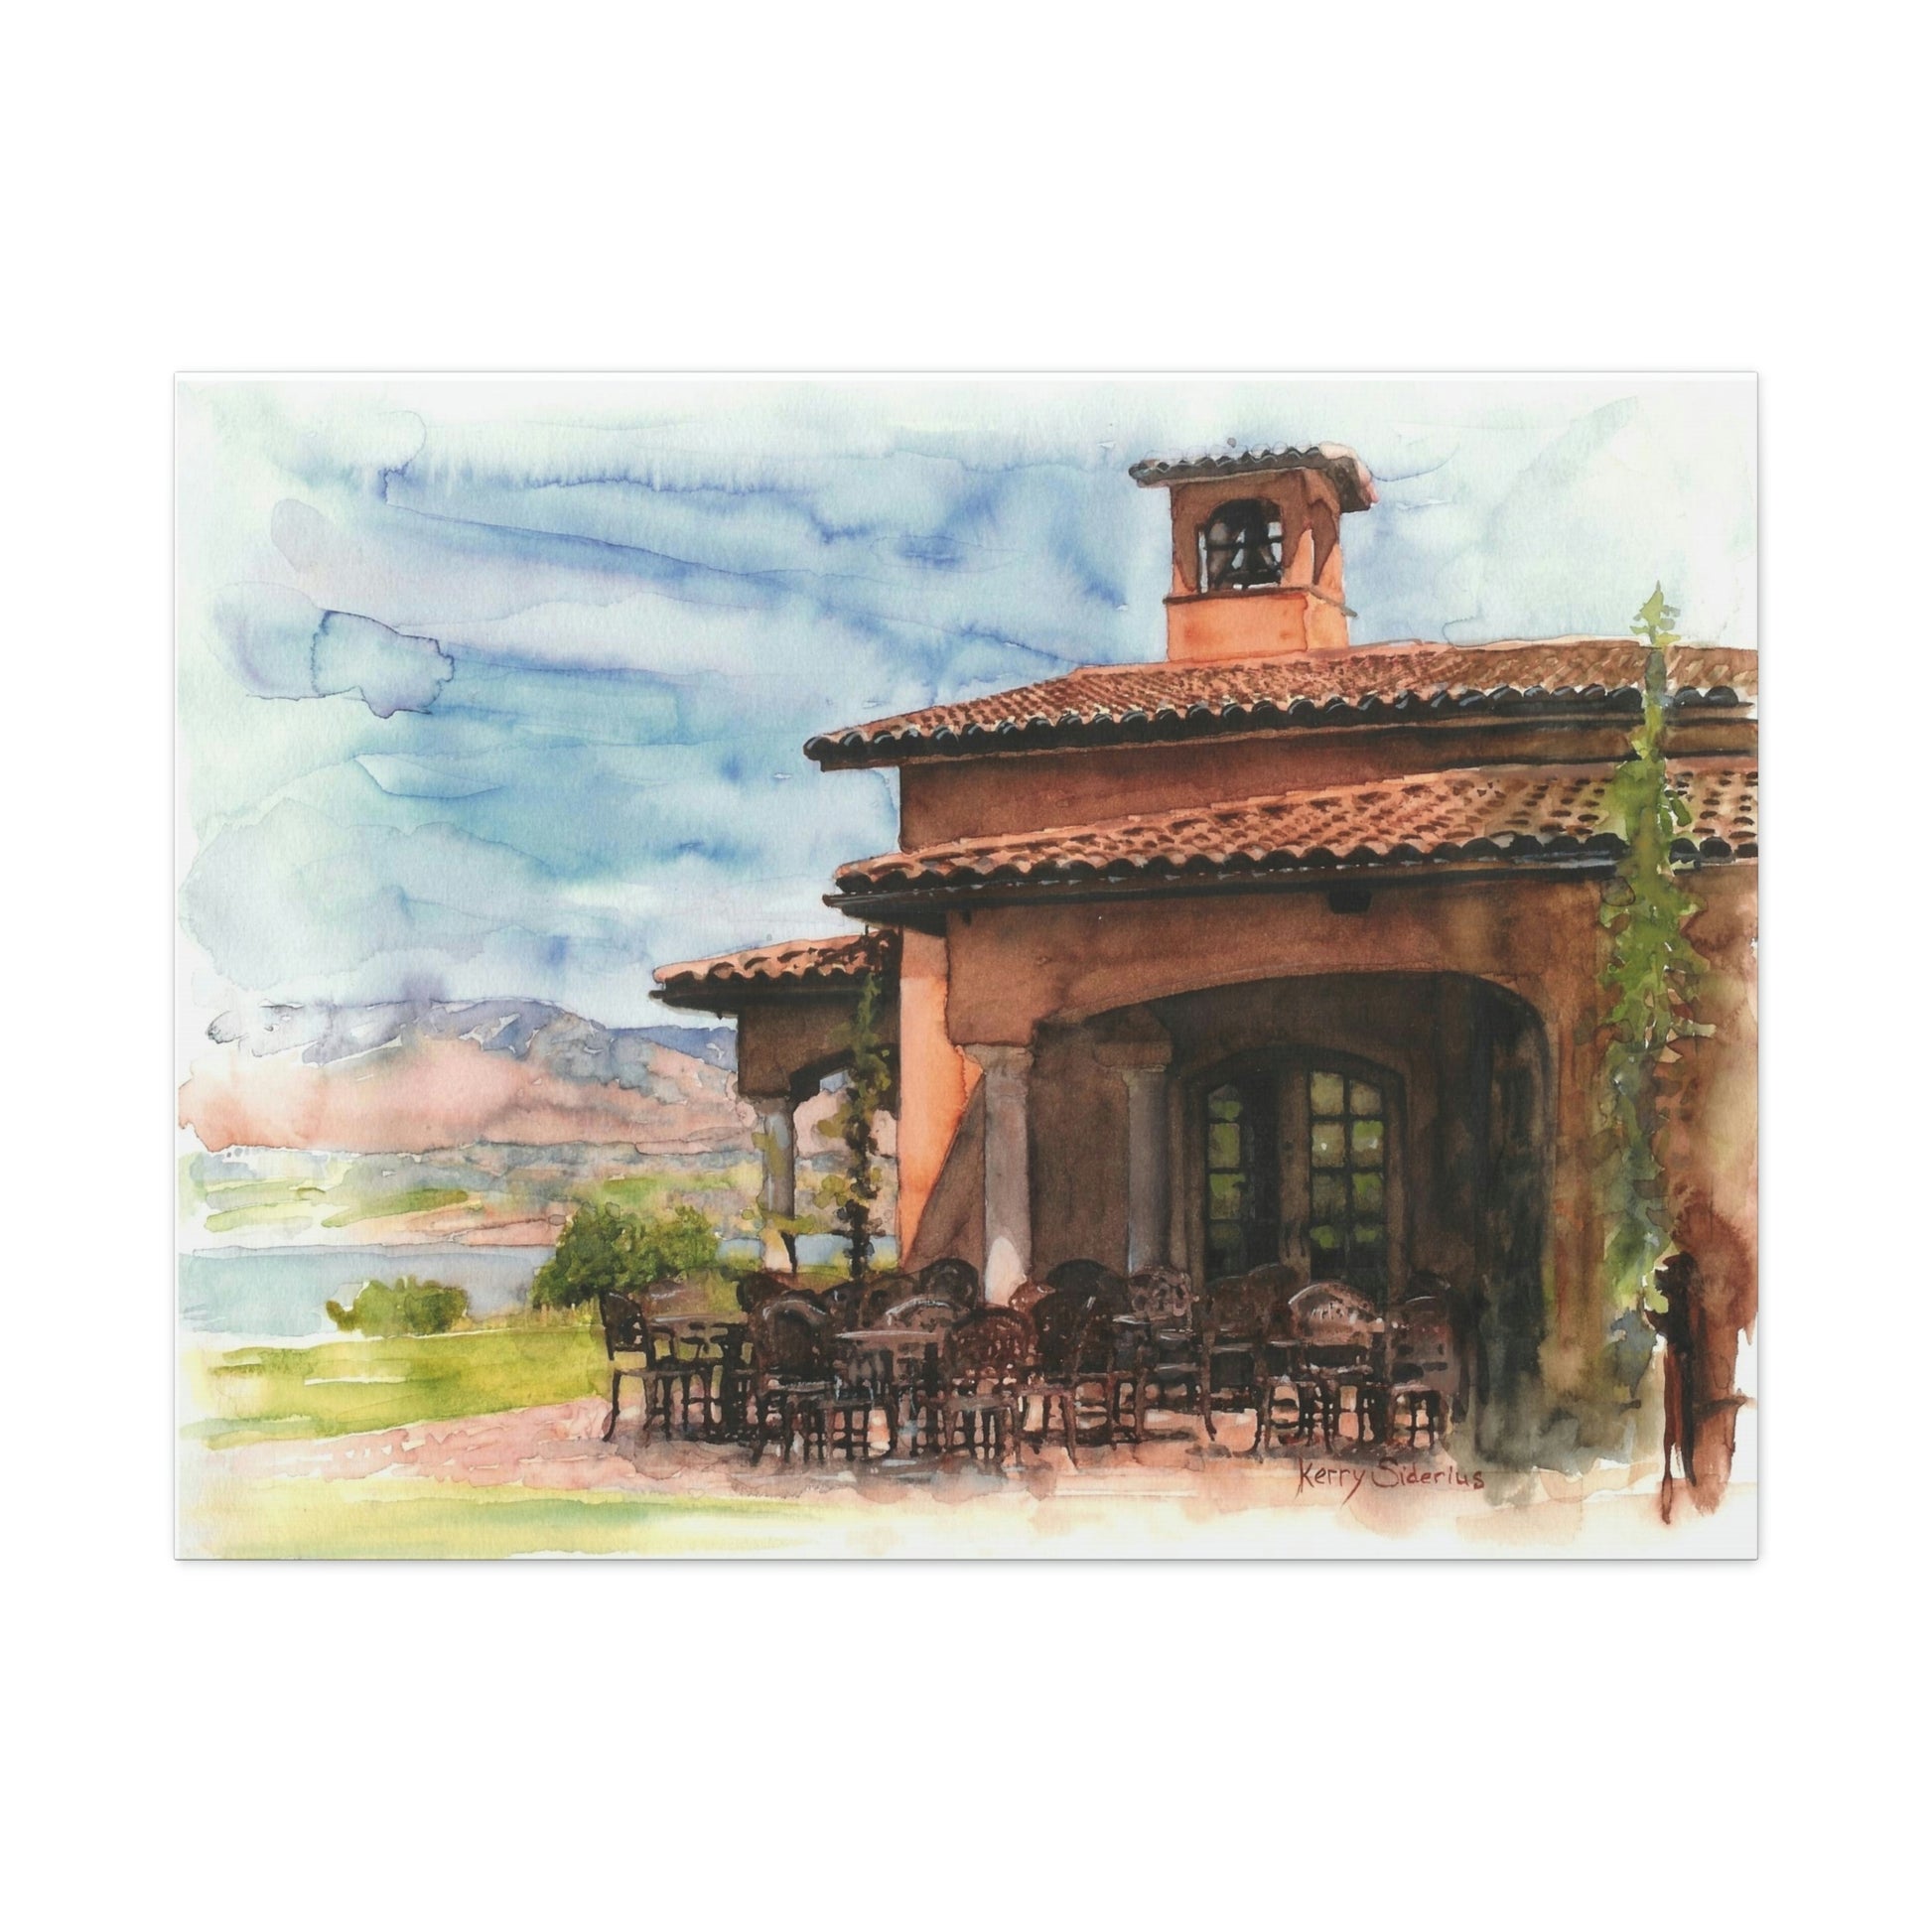 "Tsillan Cellars" Gallery-Wrapped Canvas - Kerry Siderius Art 